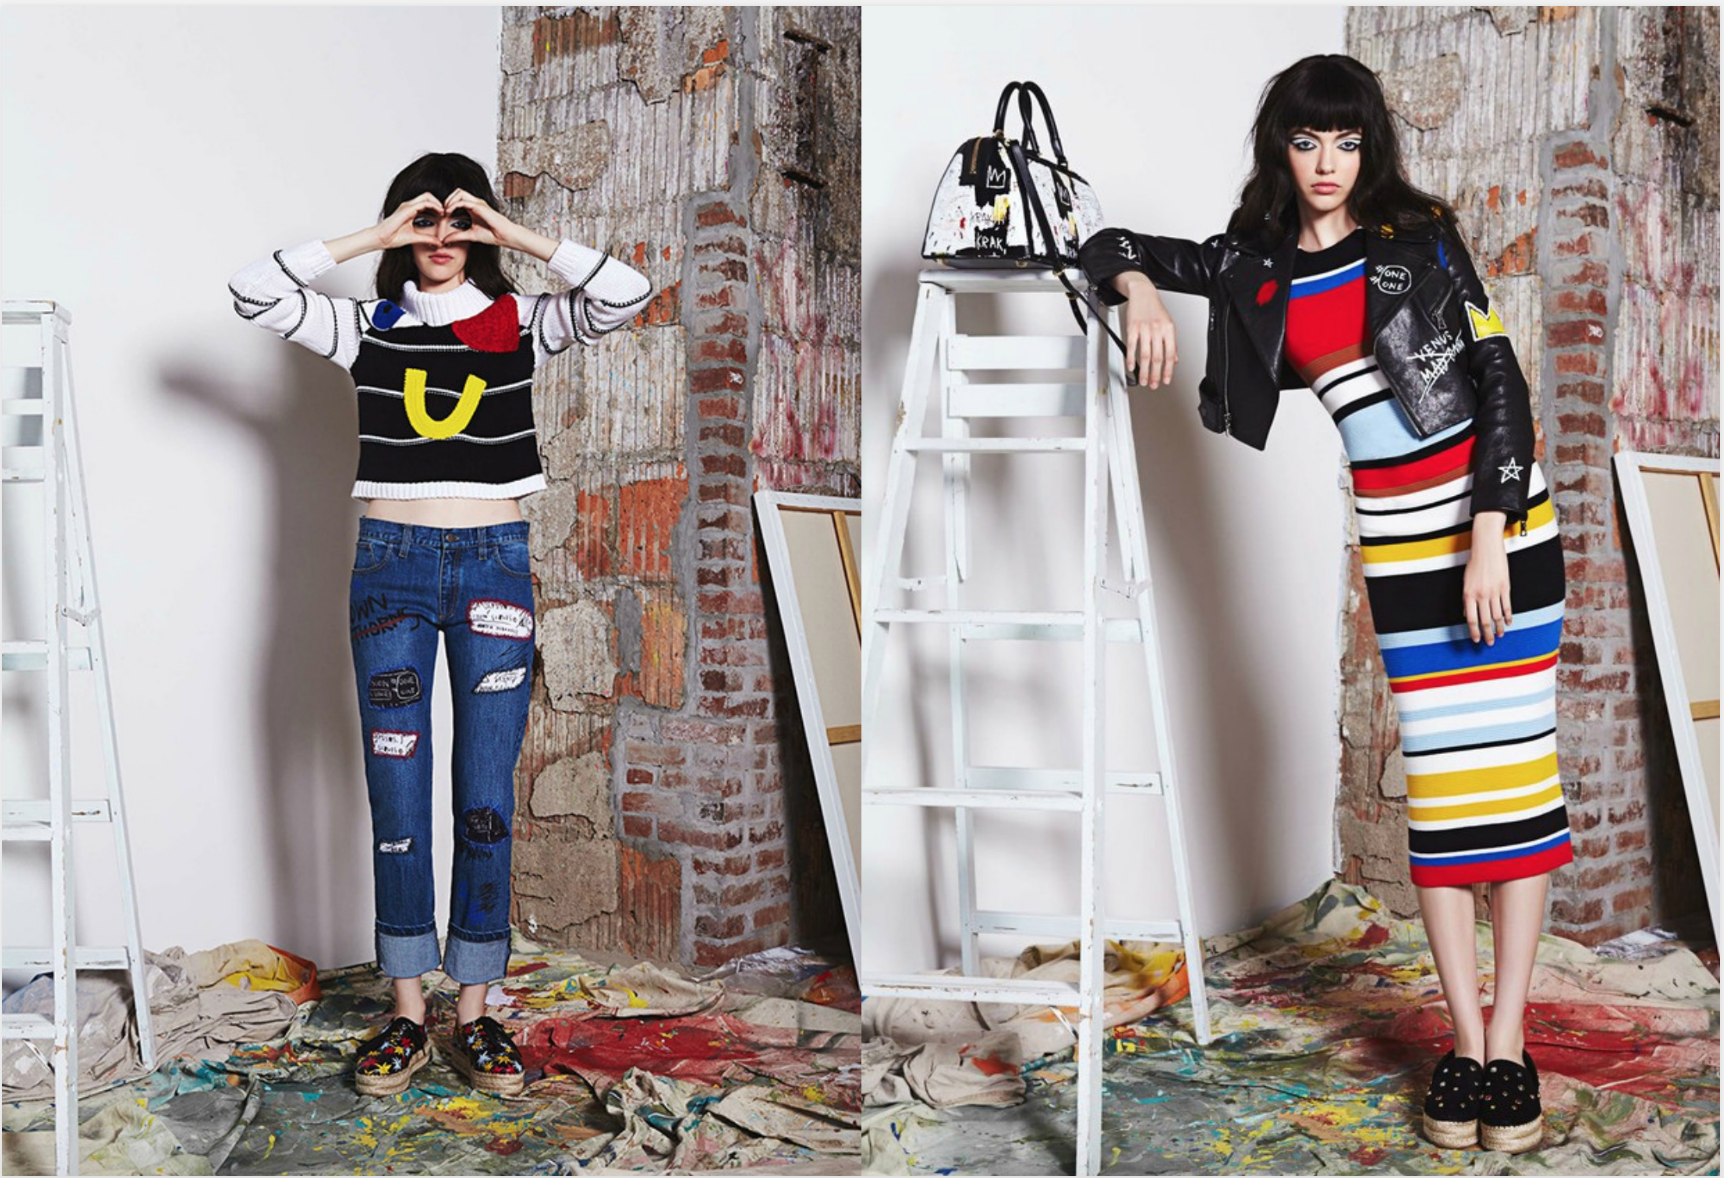 STACEY BENDET ANNOUNCES COLLABORATION WITH BASQUIAT ESTATE FOR SECOND INSTALLMENT OF ALICE + OLIVIA AND CFDA INITIATIVE FOR YOUNG TALENT